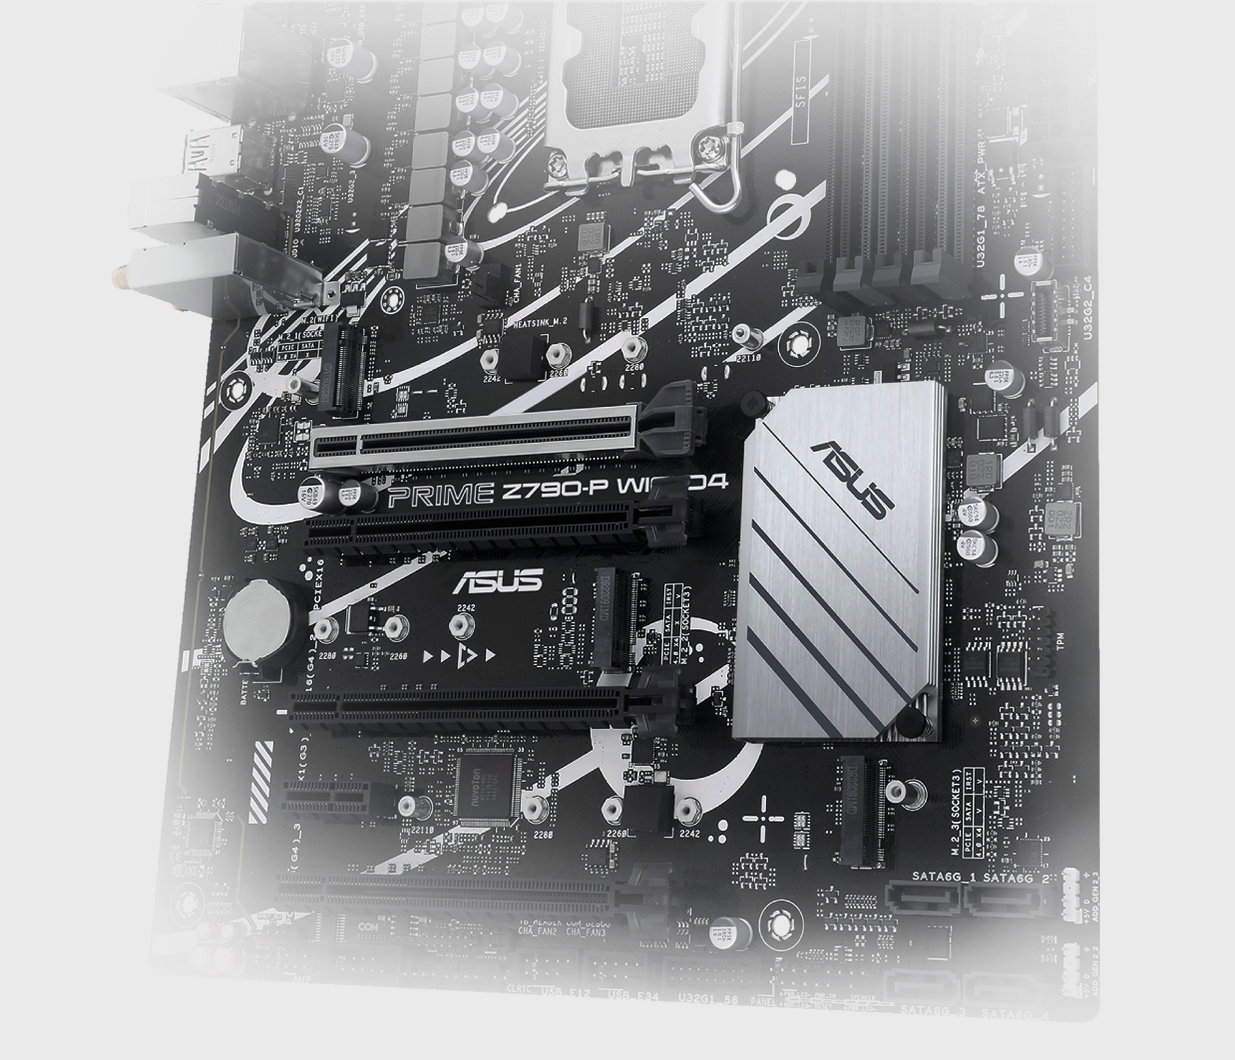 The PRIME Z790-P WIFI D4-CSM motherboard supports three M.2 slots.